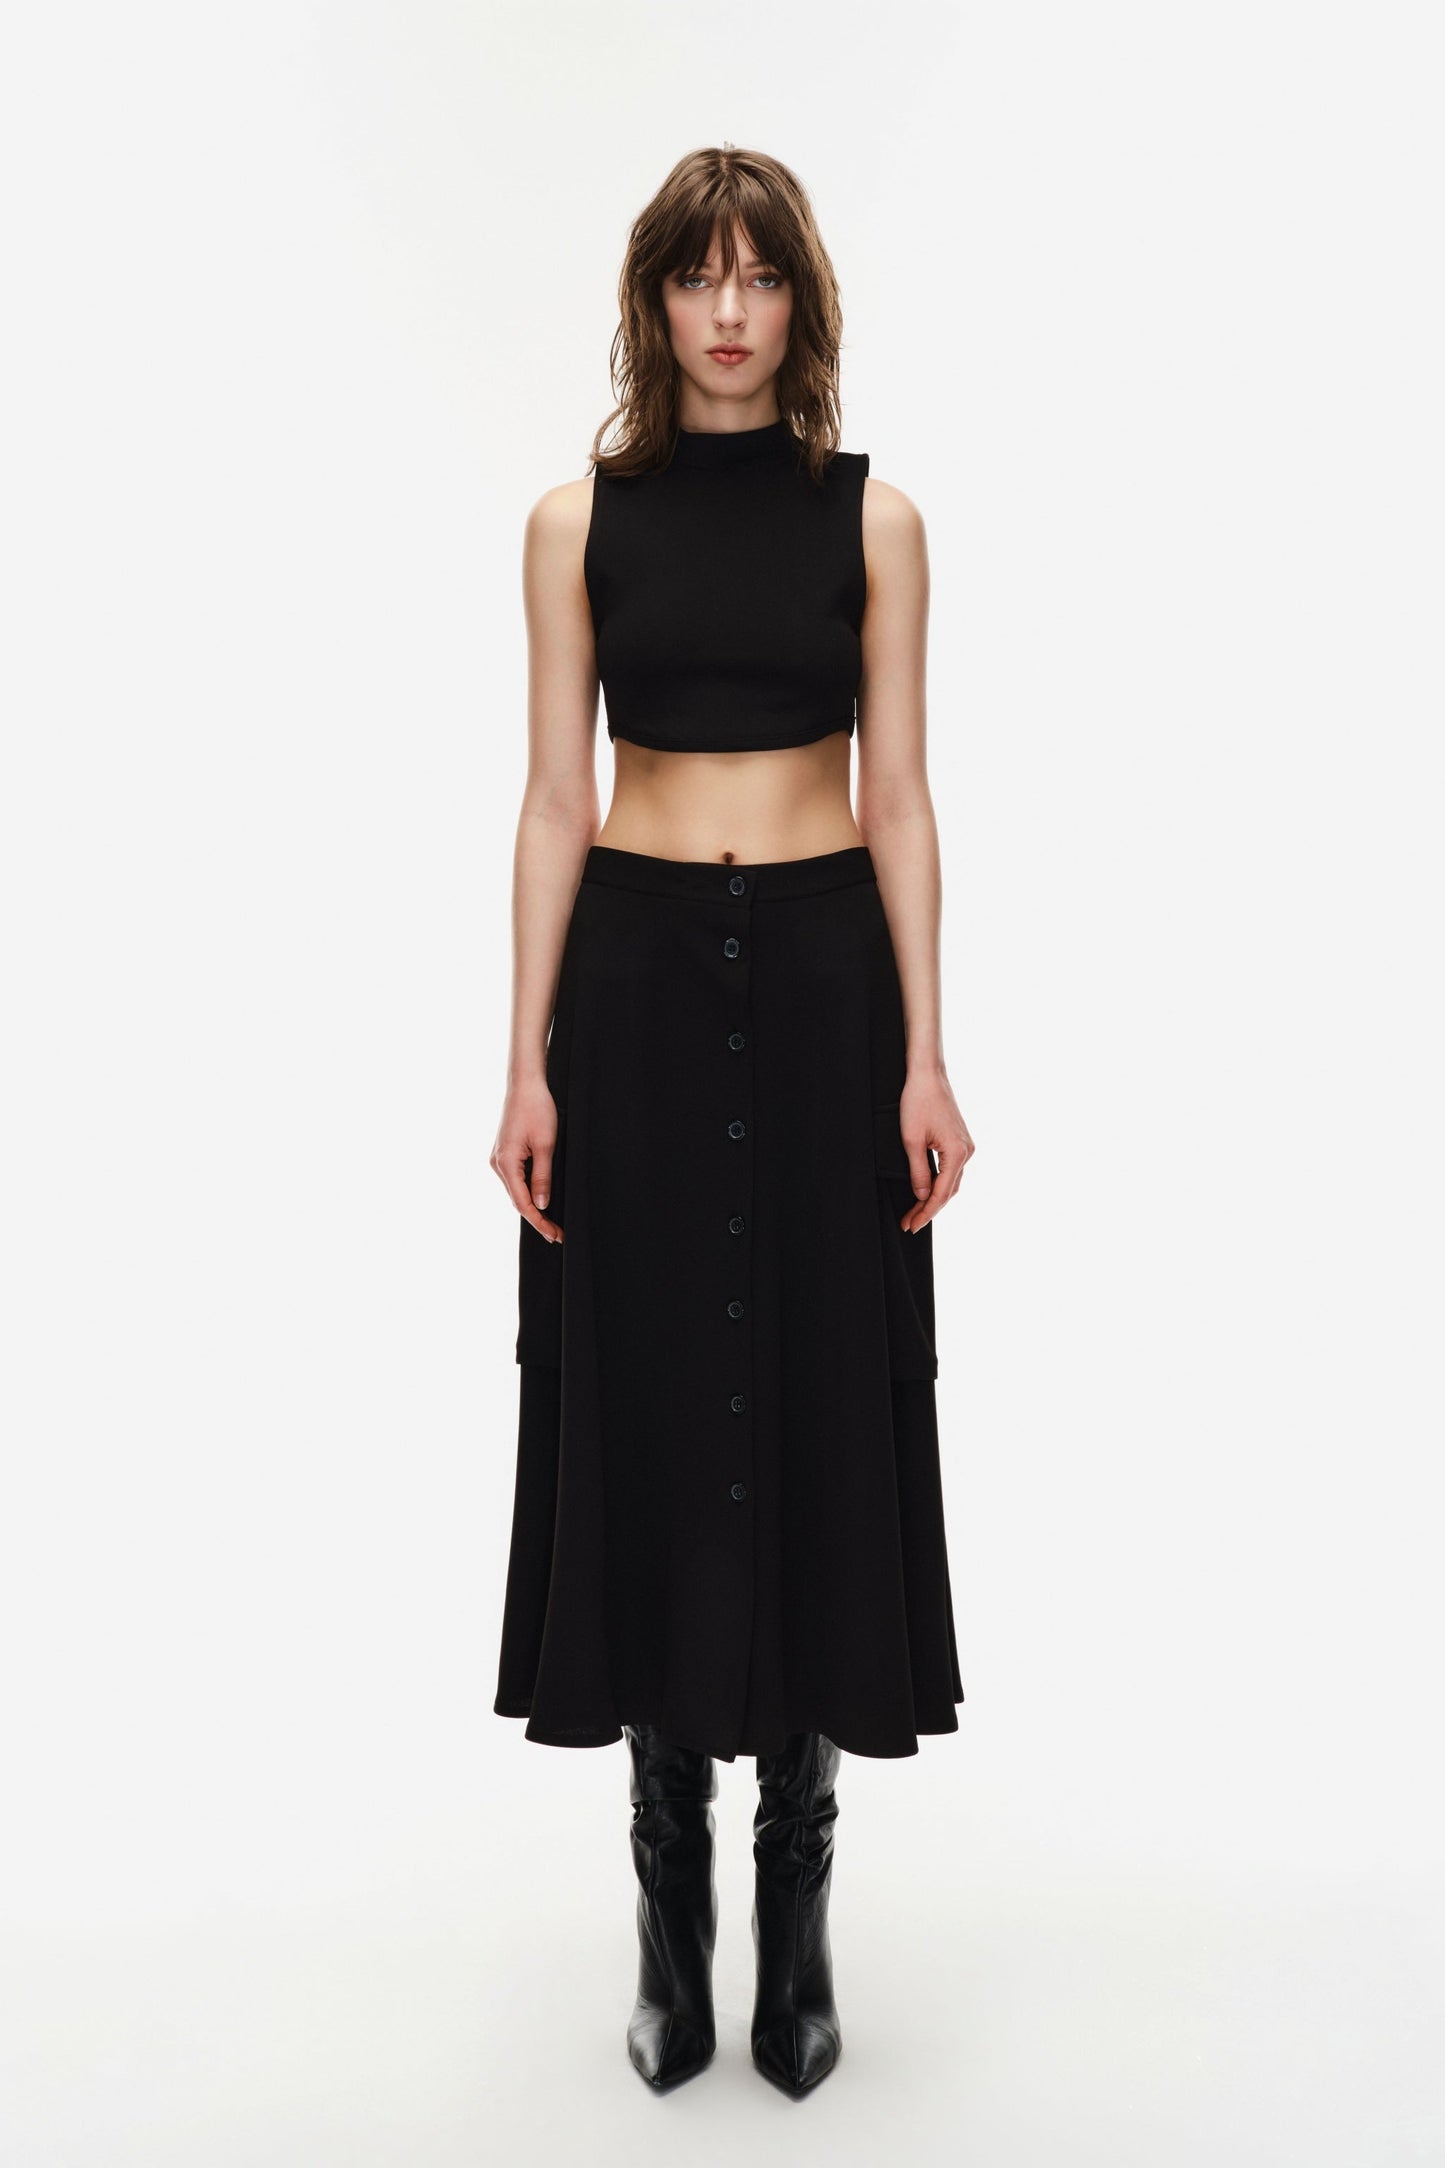 Crop top with high collar Baroc Boutique